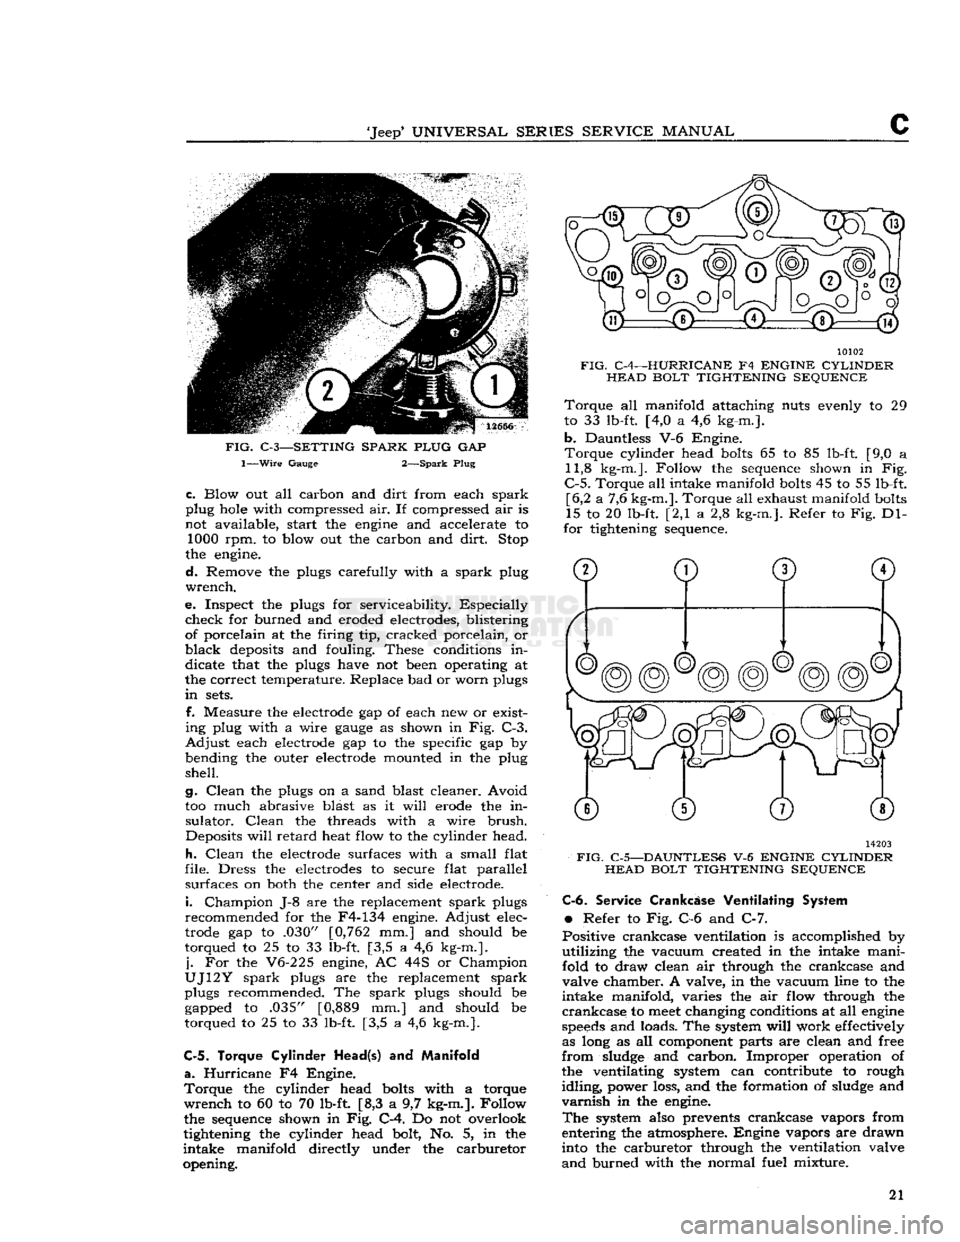 JEEP CJ 1953  Service Manual 
Jeep
 UNIVERSAL SERIES SERVICE
 MANUAL 

FIG.
 C-3—SETTING SPARK PLUG
 GAP 
 1—Wire
 Gauge 2—Spark Plug 
 c.
 Blow out all carbon and
 dirt
 from each
 spark 

plug hole with compressed air. 